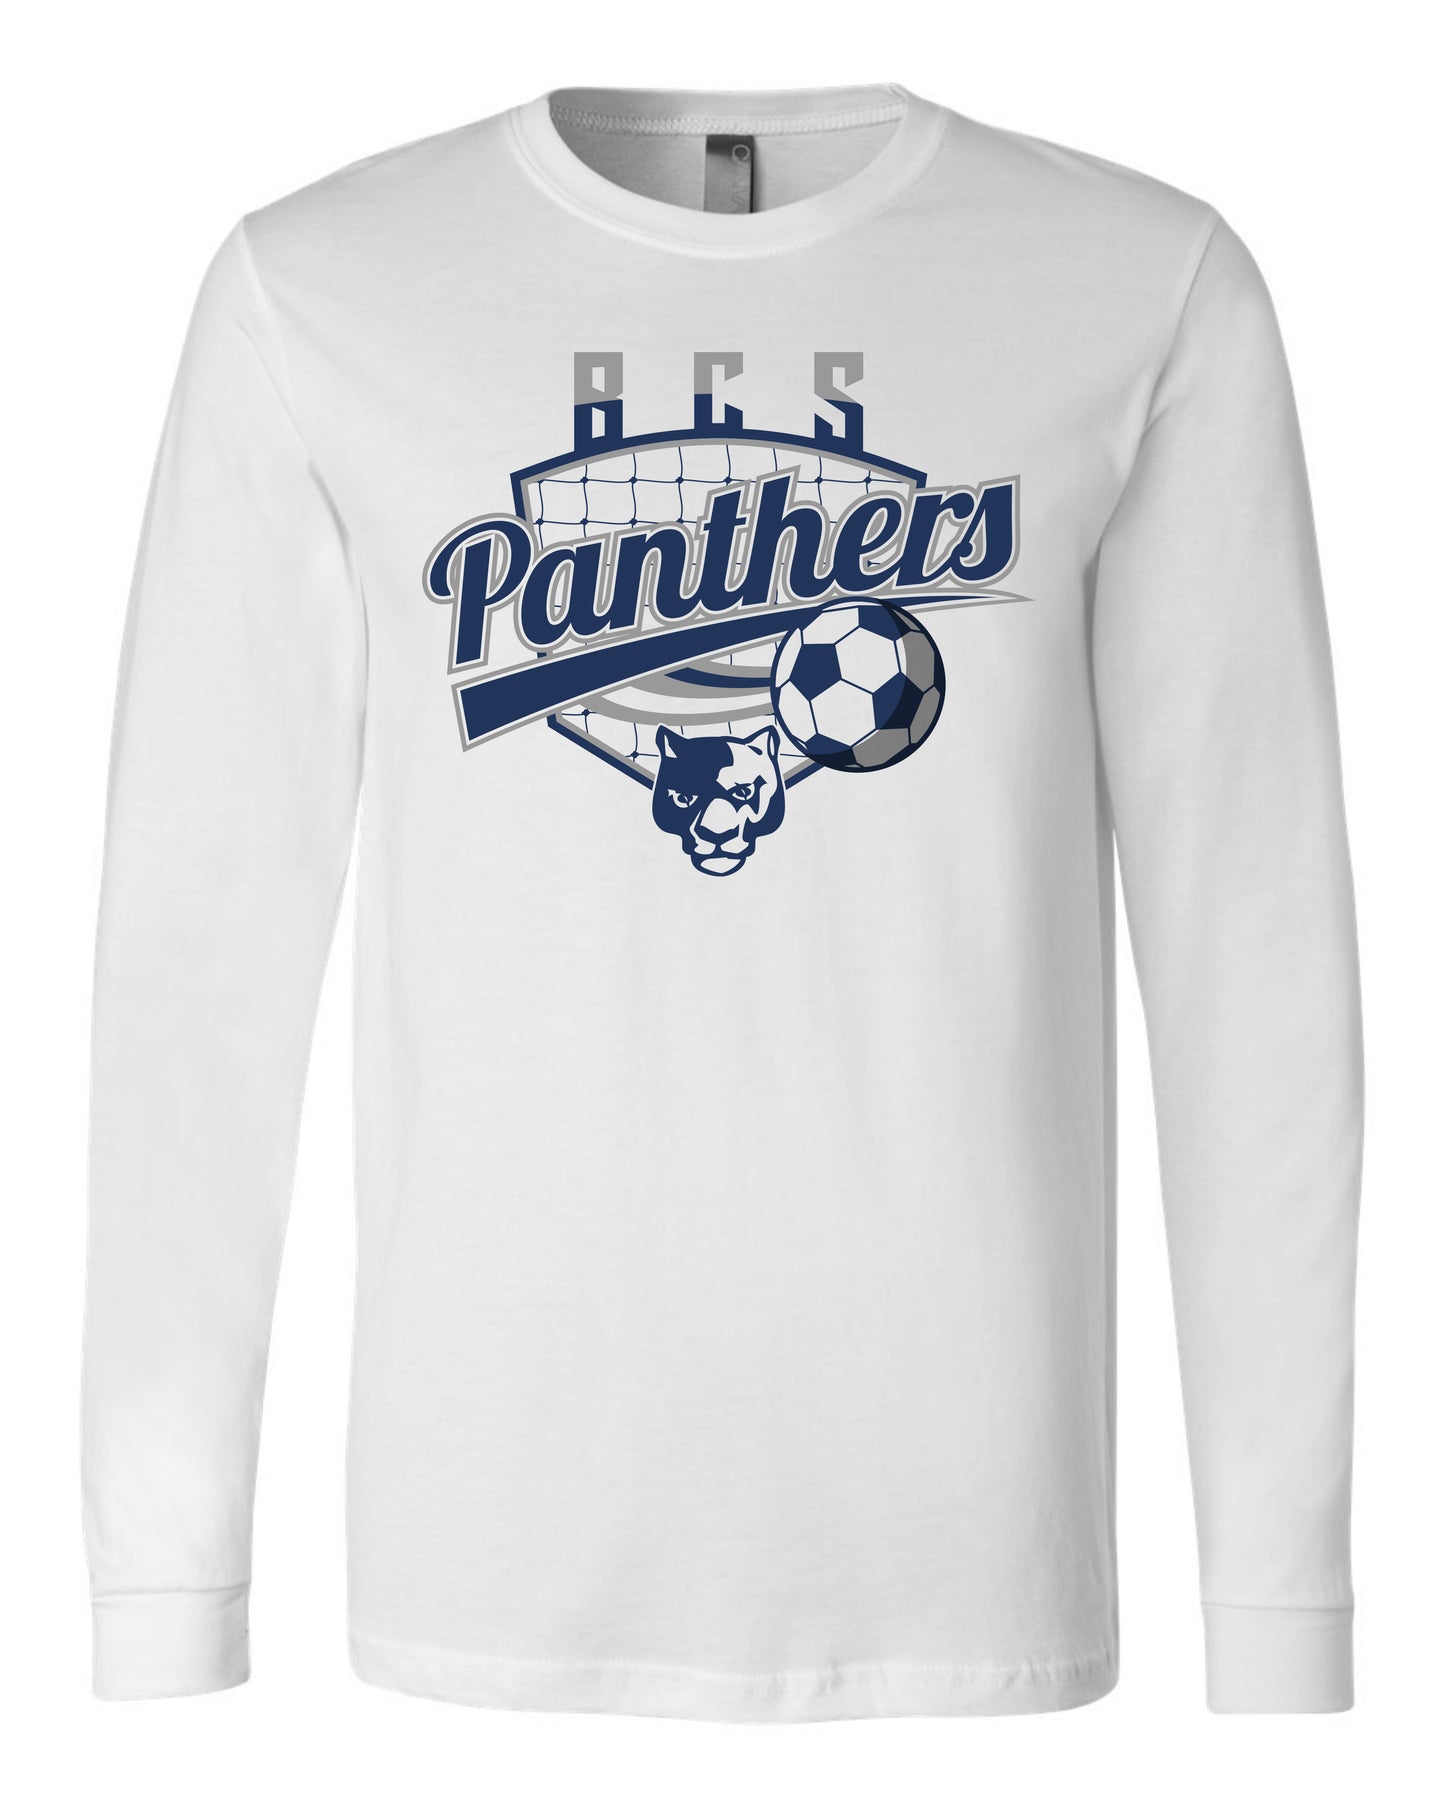 BCS Panthers Soccer Shield - Youth Long Sleeve